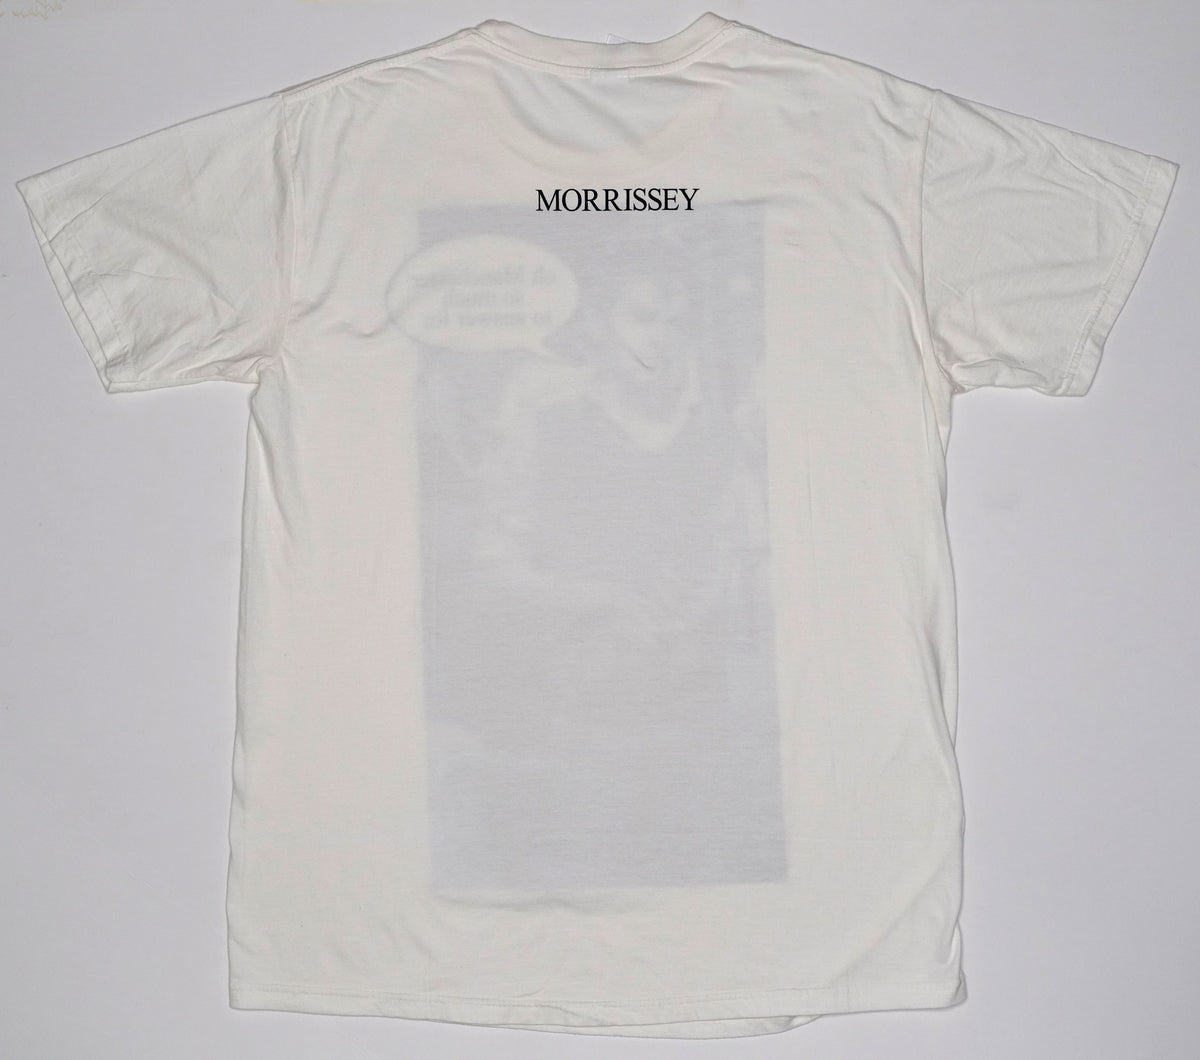 Morrissey - Oh Manchester So Much To Answer For Tour Shirt Size